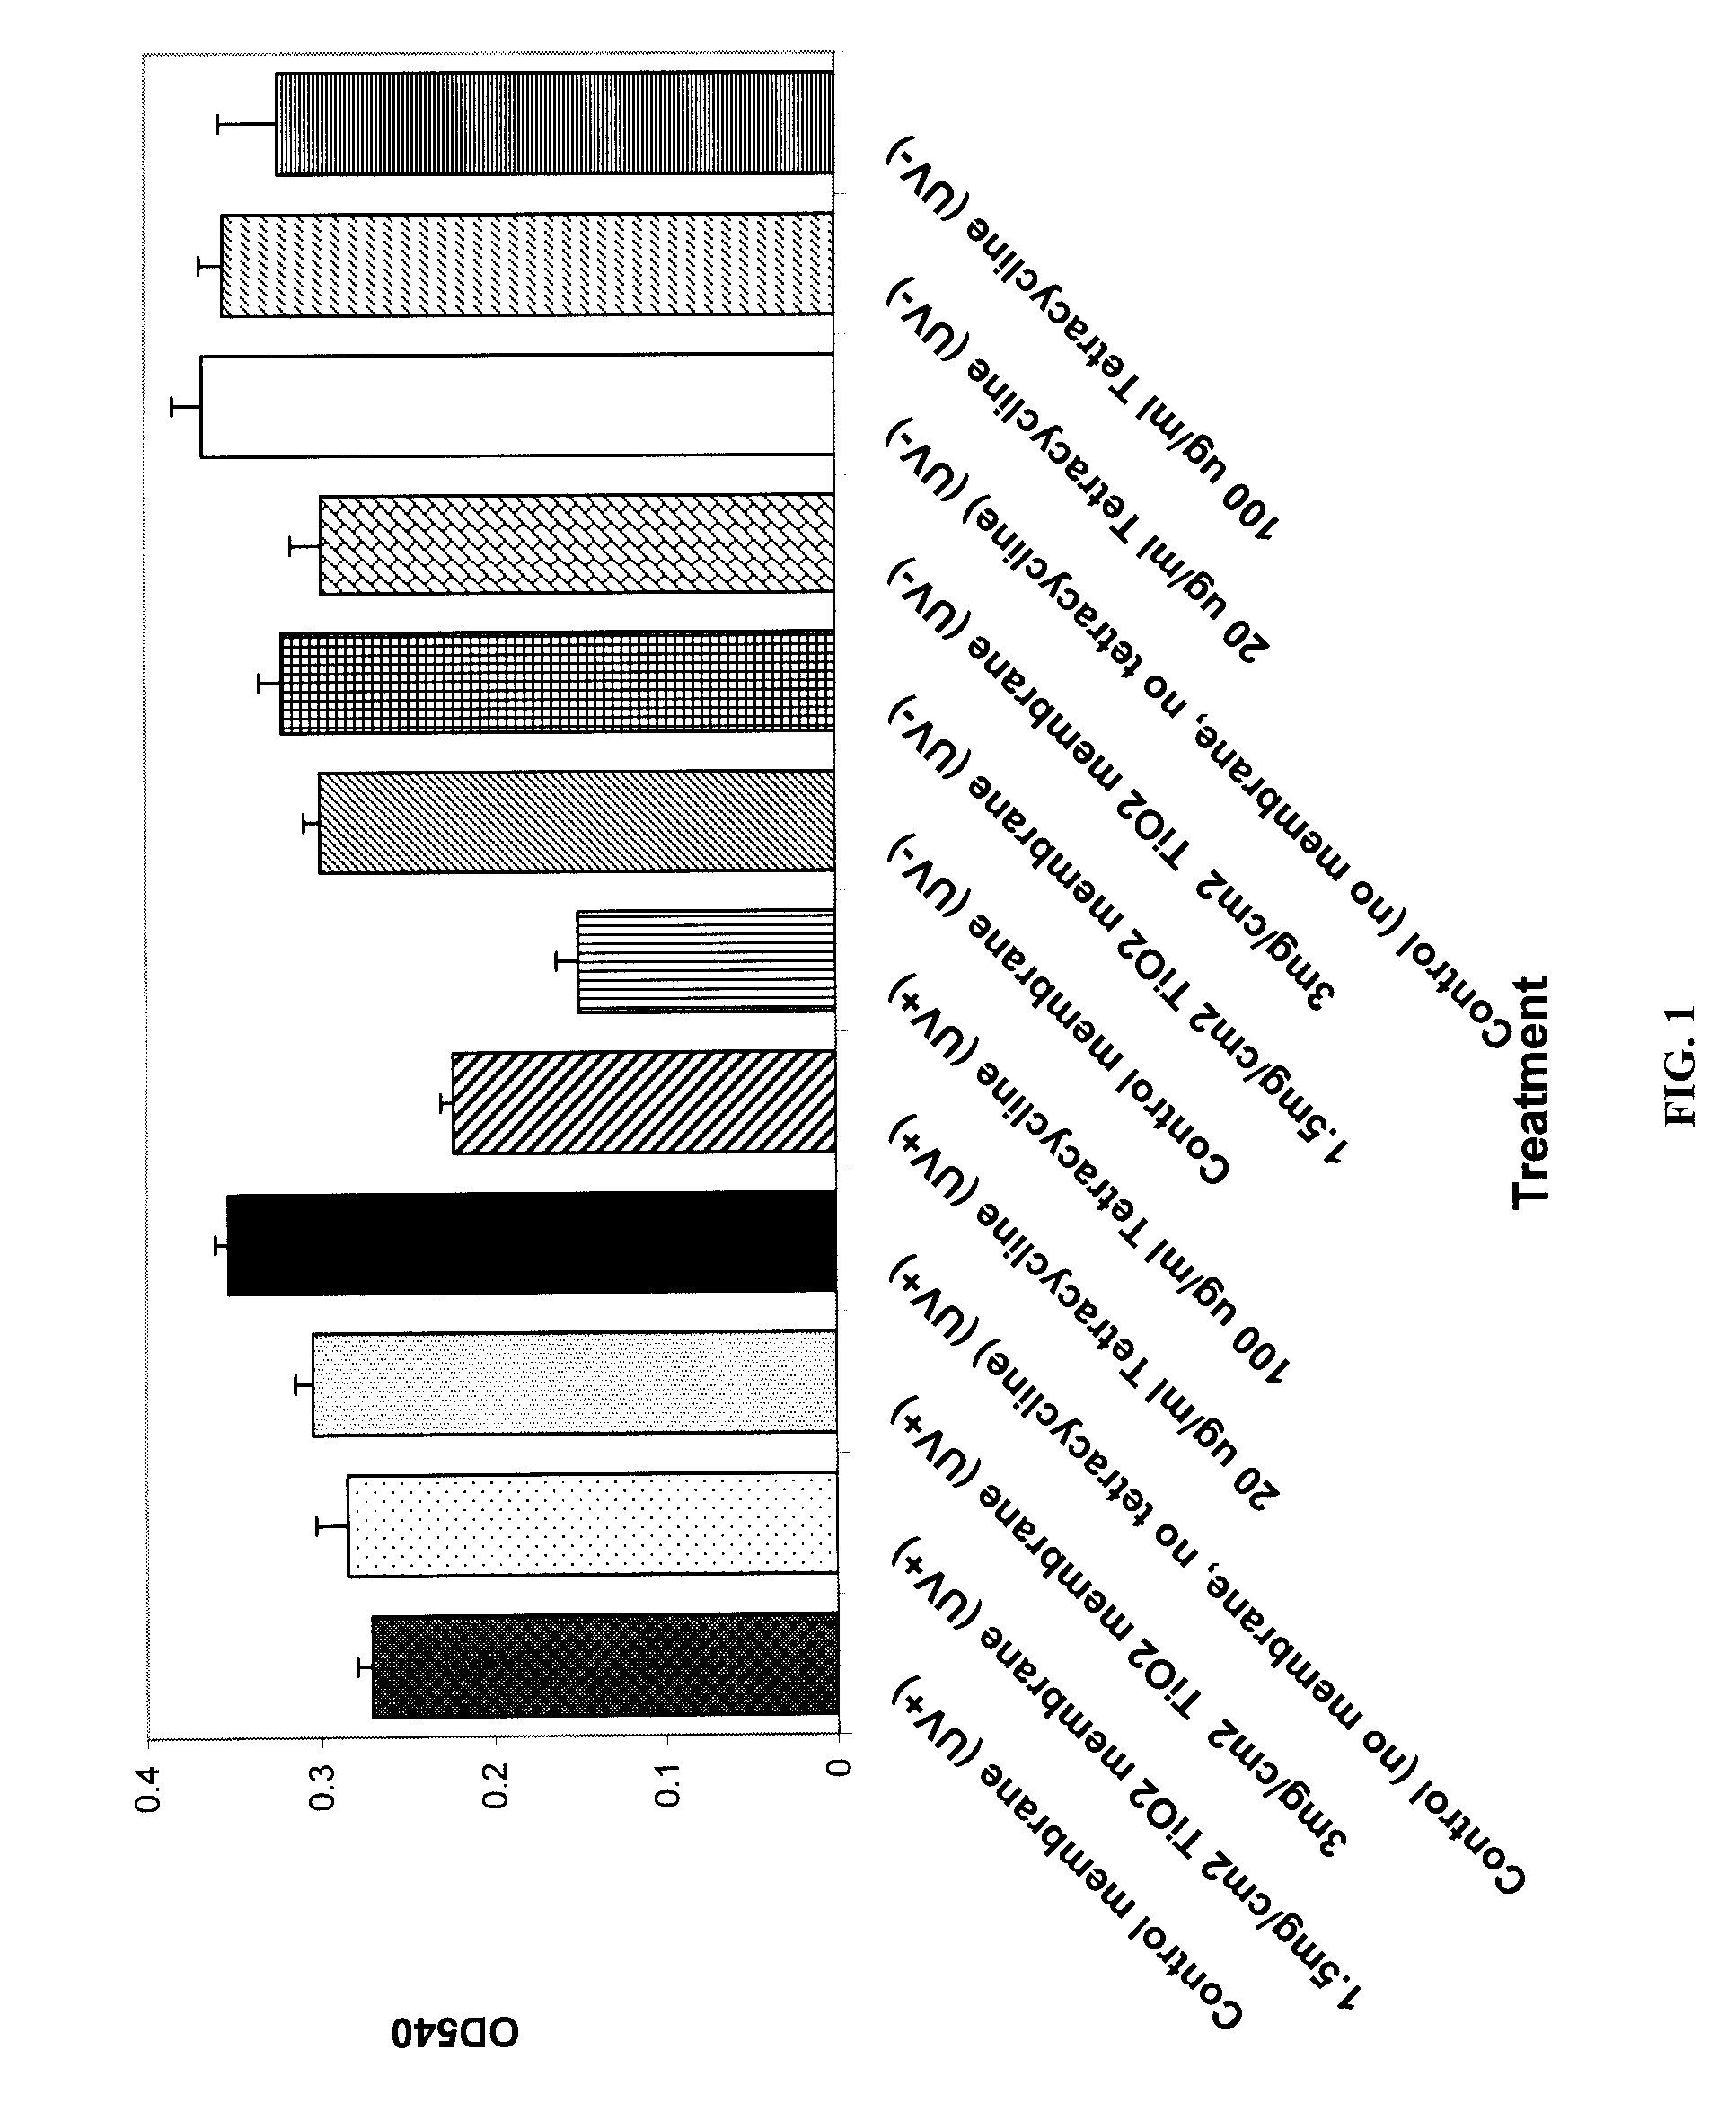 Photoactivated Antimicrobial Wound Dressing and Method Relating Thereto